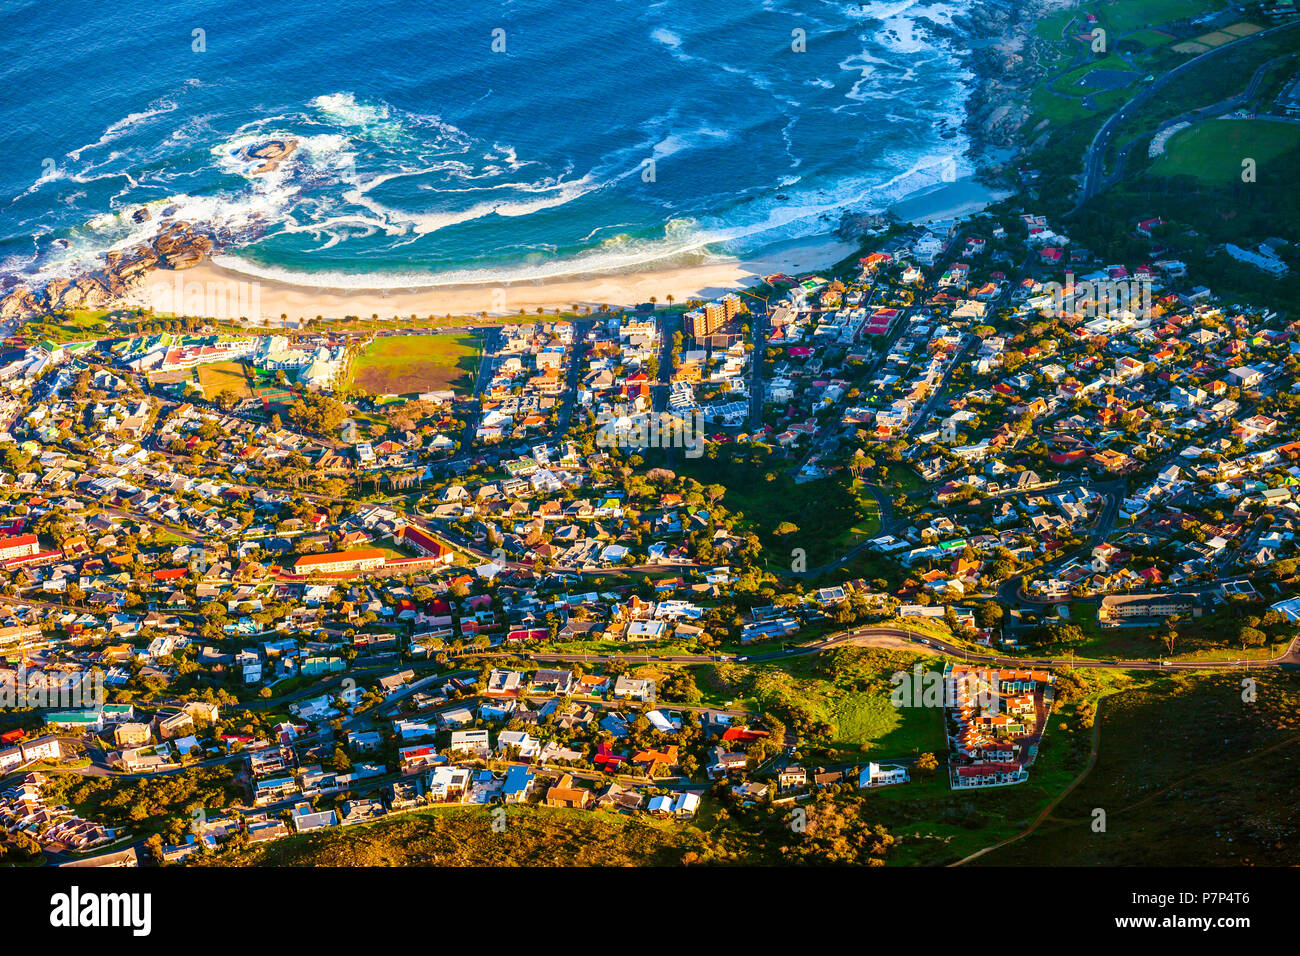 Camps Bay, Cape Town seen from a high angle Stock Photo